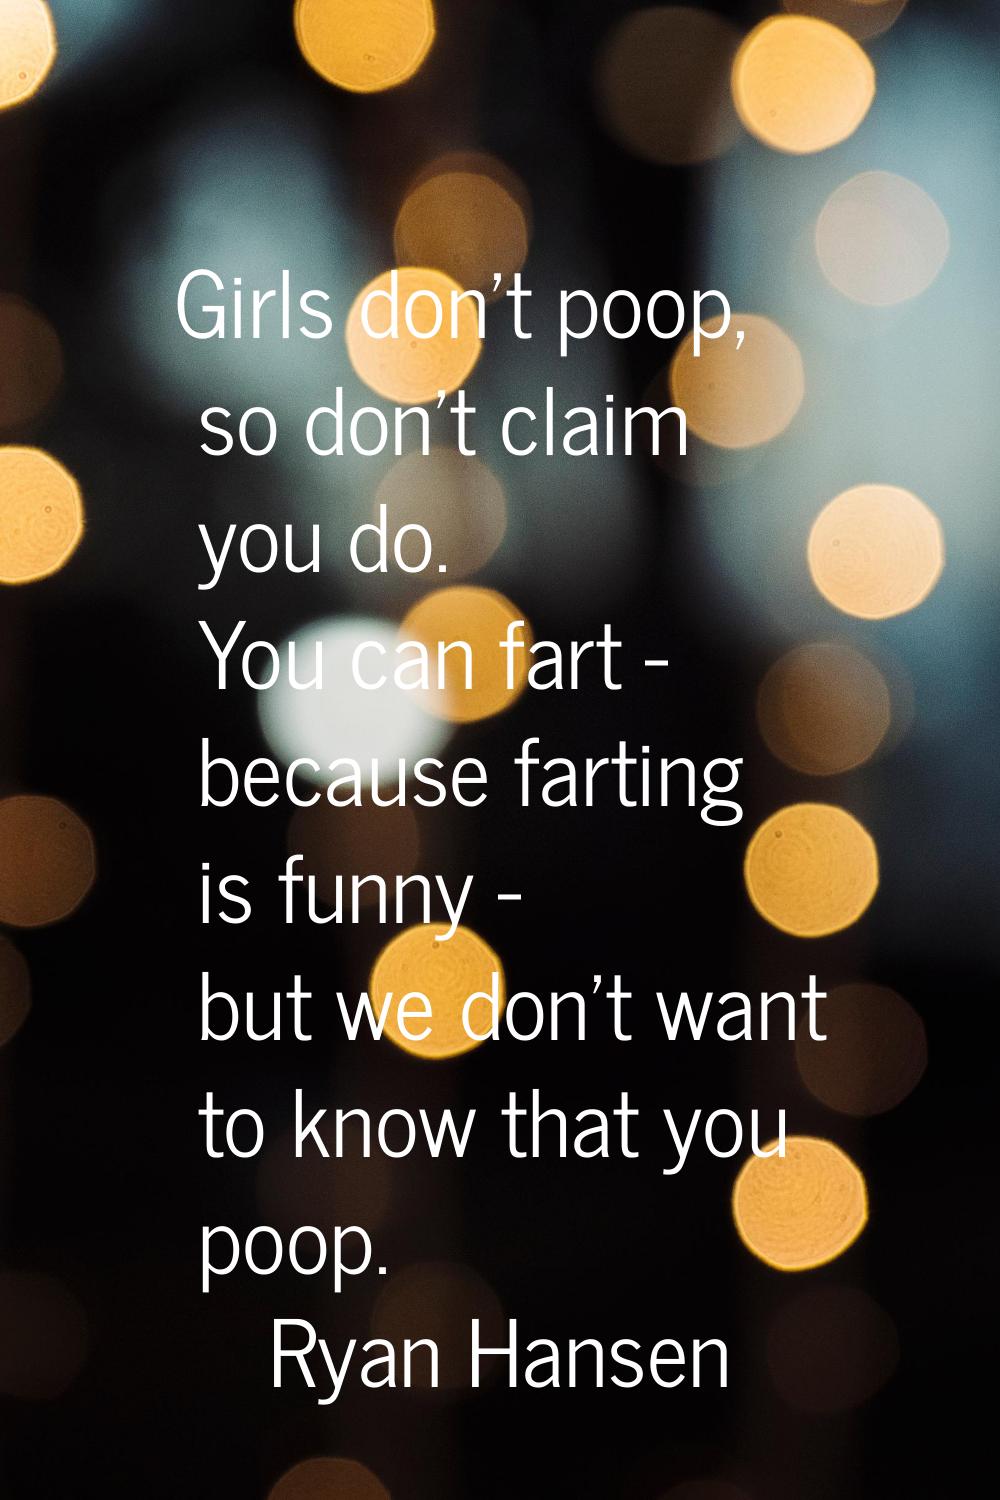 Girls don't poop, so don't claim you do. You can fart - because farting is funny - but we don't wan